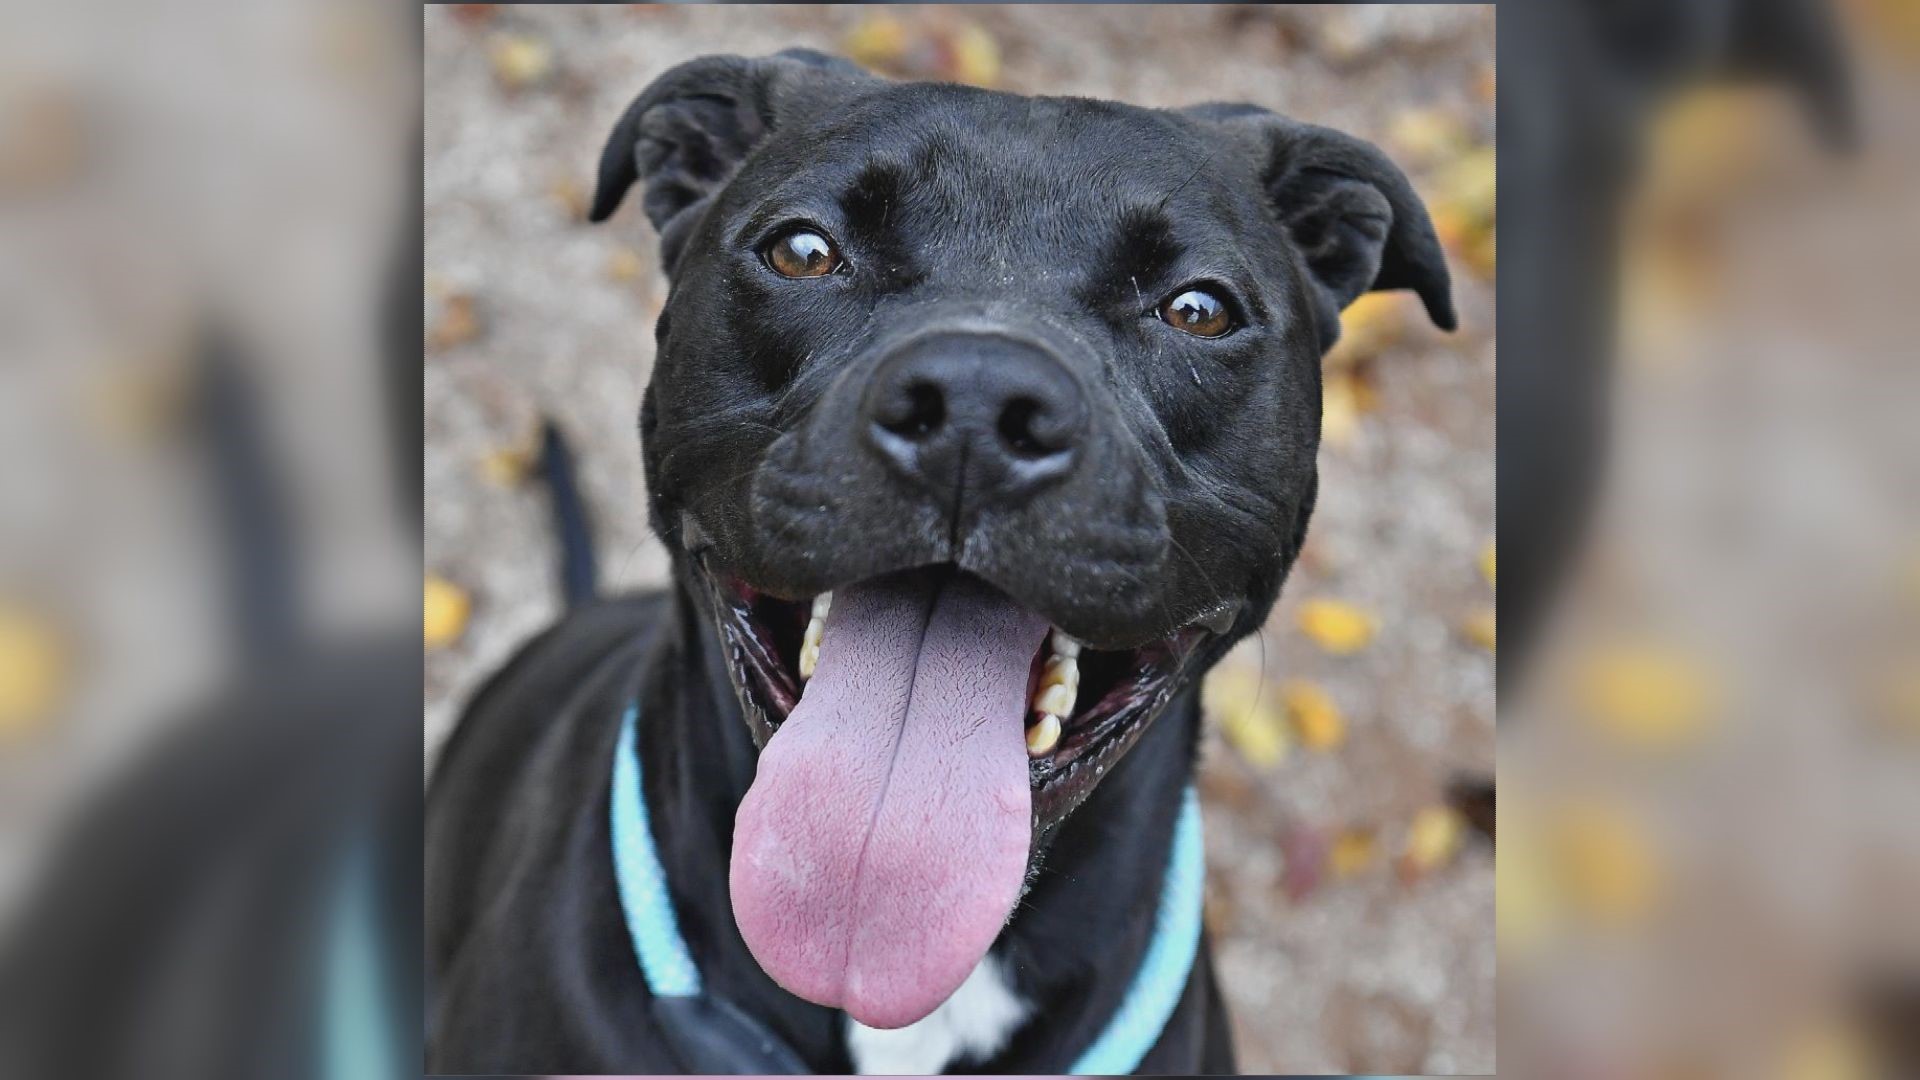 Monstro is a goofy and playful pup who came to Pennsylvania hoping to find his forever family.